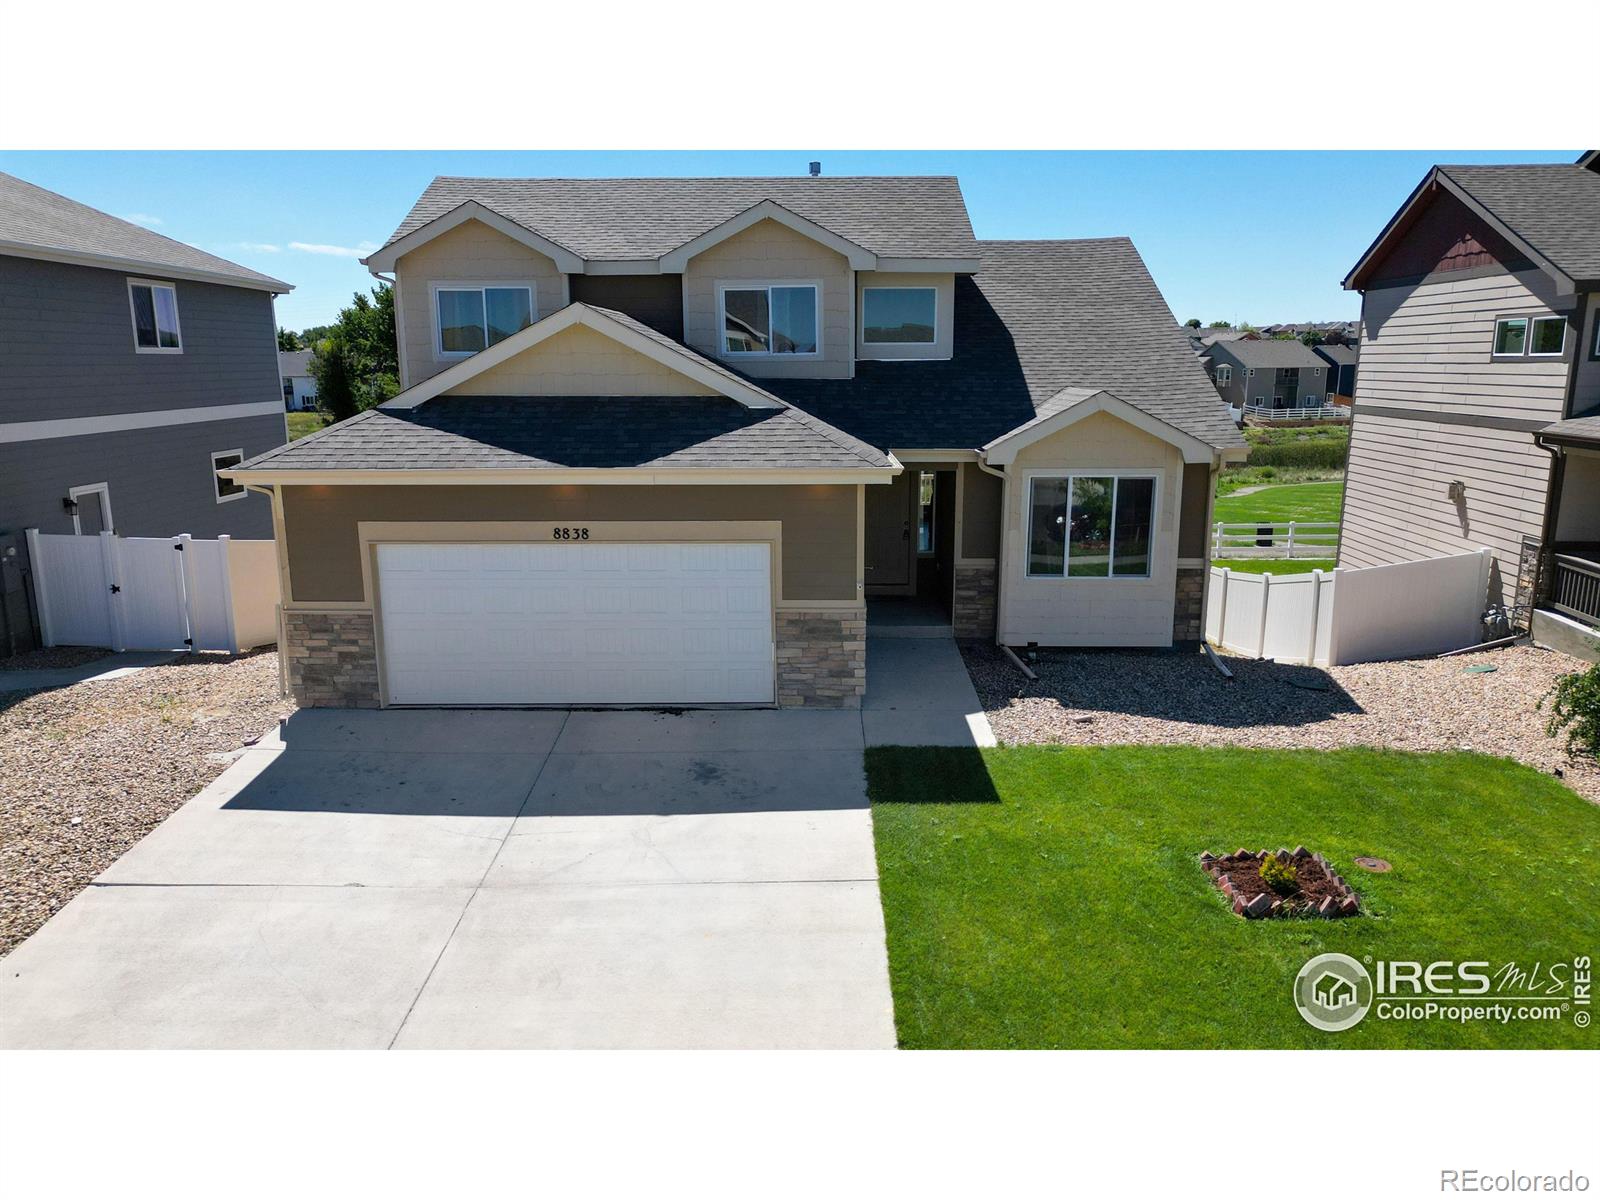 Report Image for 8838  16th St Rd,Greeley, Colorado